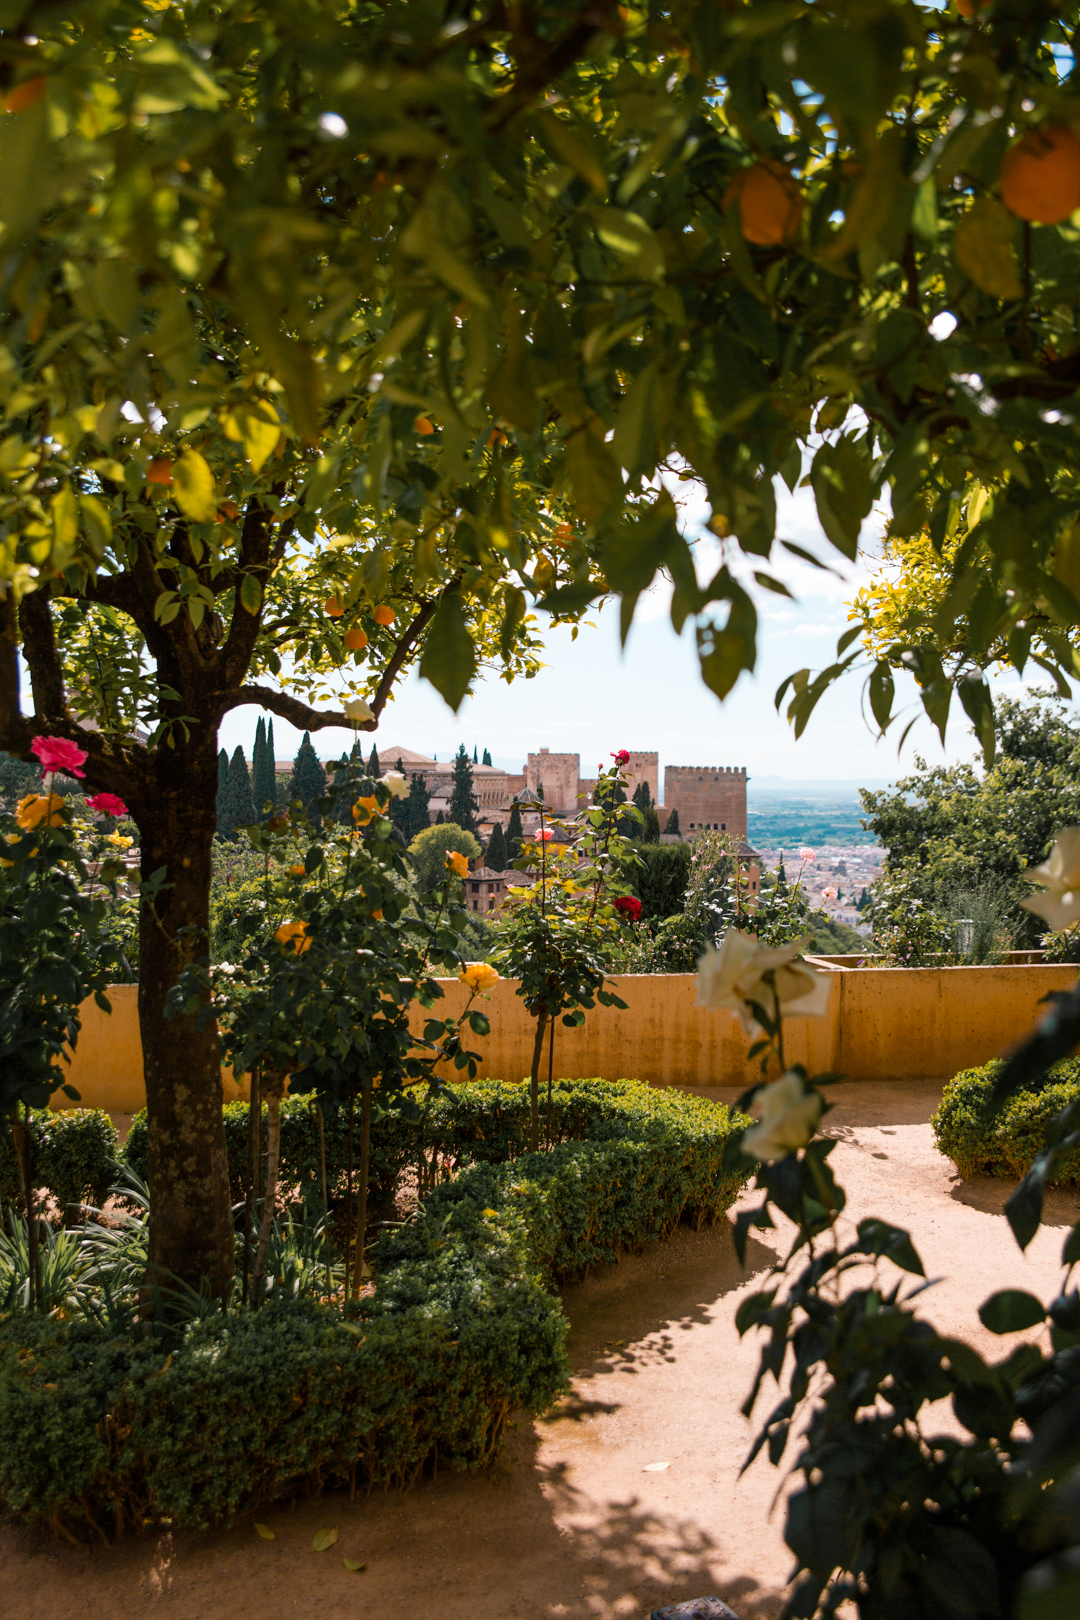 Views of Alhambra from the Generalife Gardens.